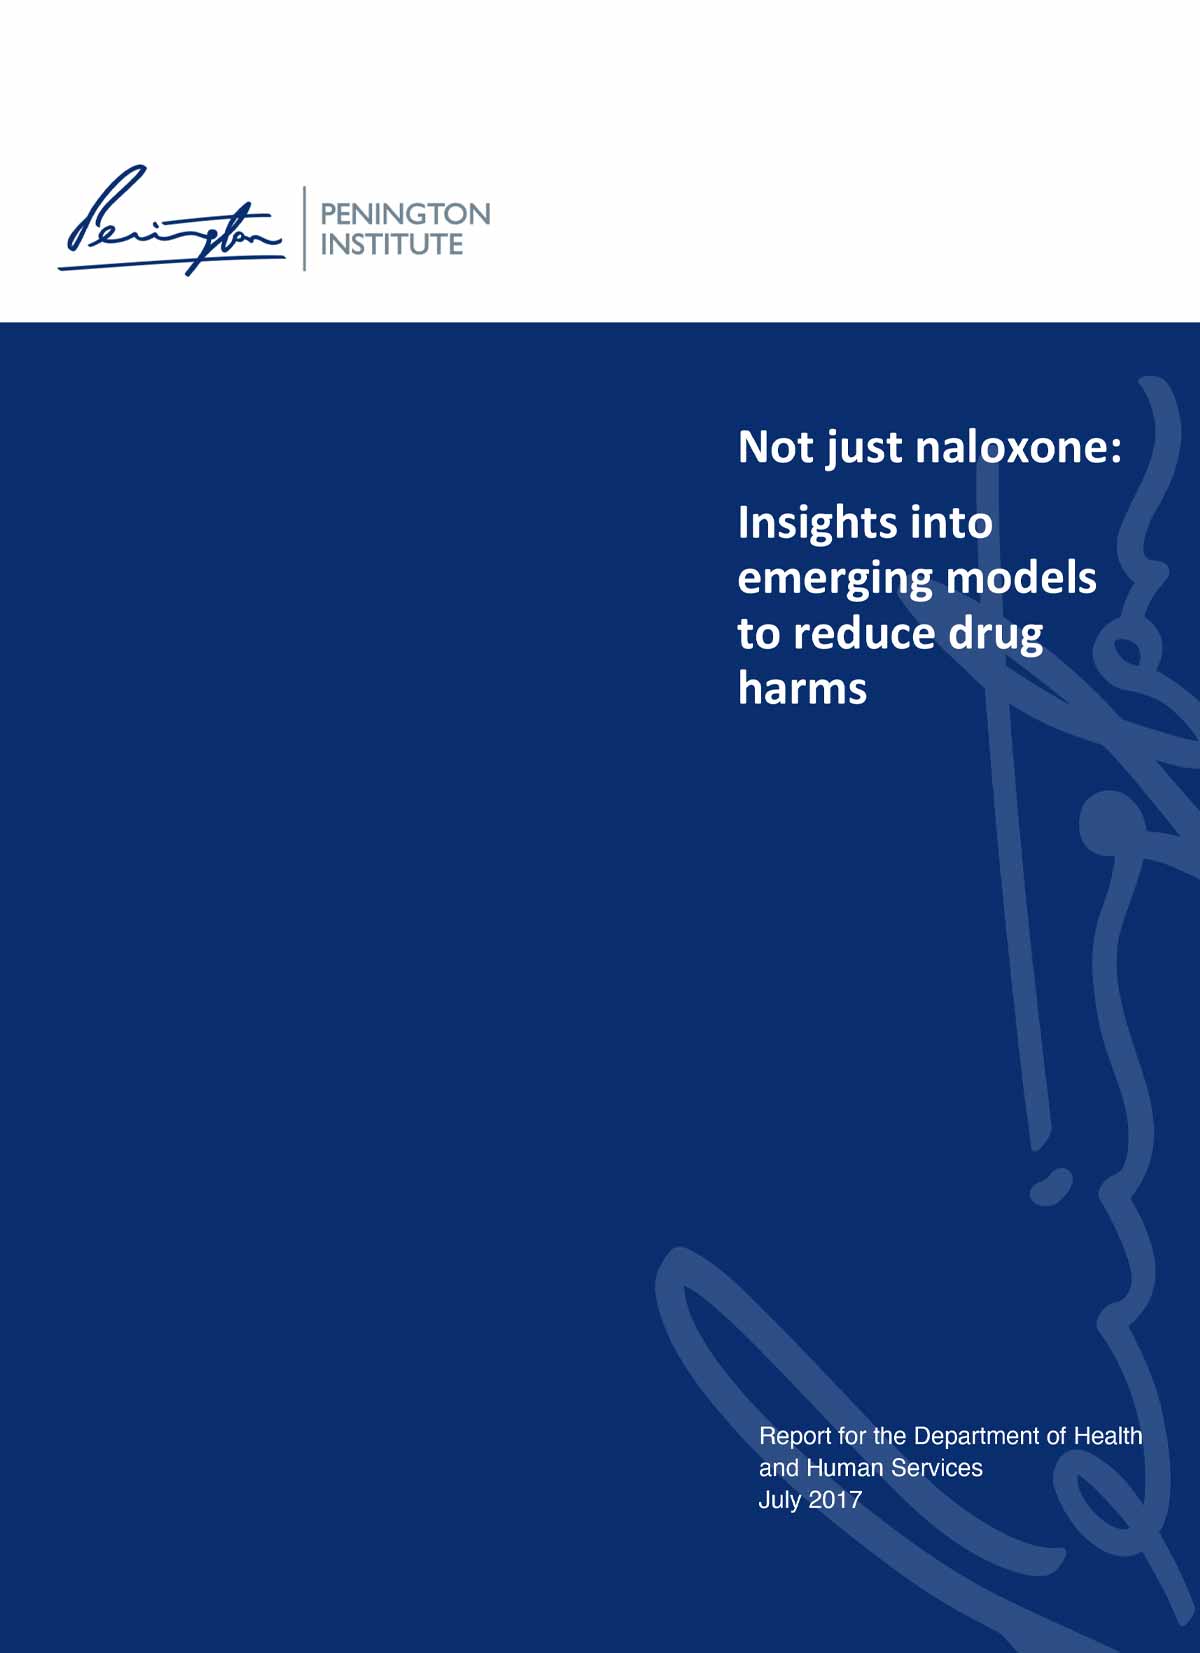 Not just naloxone: Insights into emerging models to reduce drug harms 2017